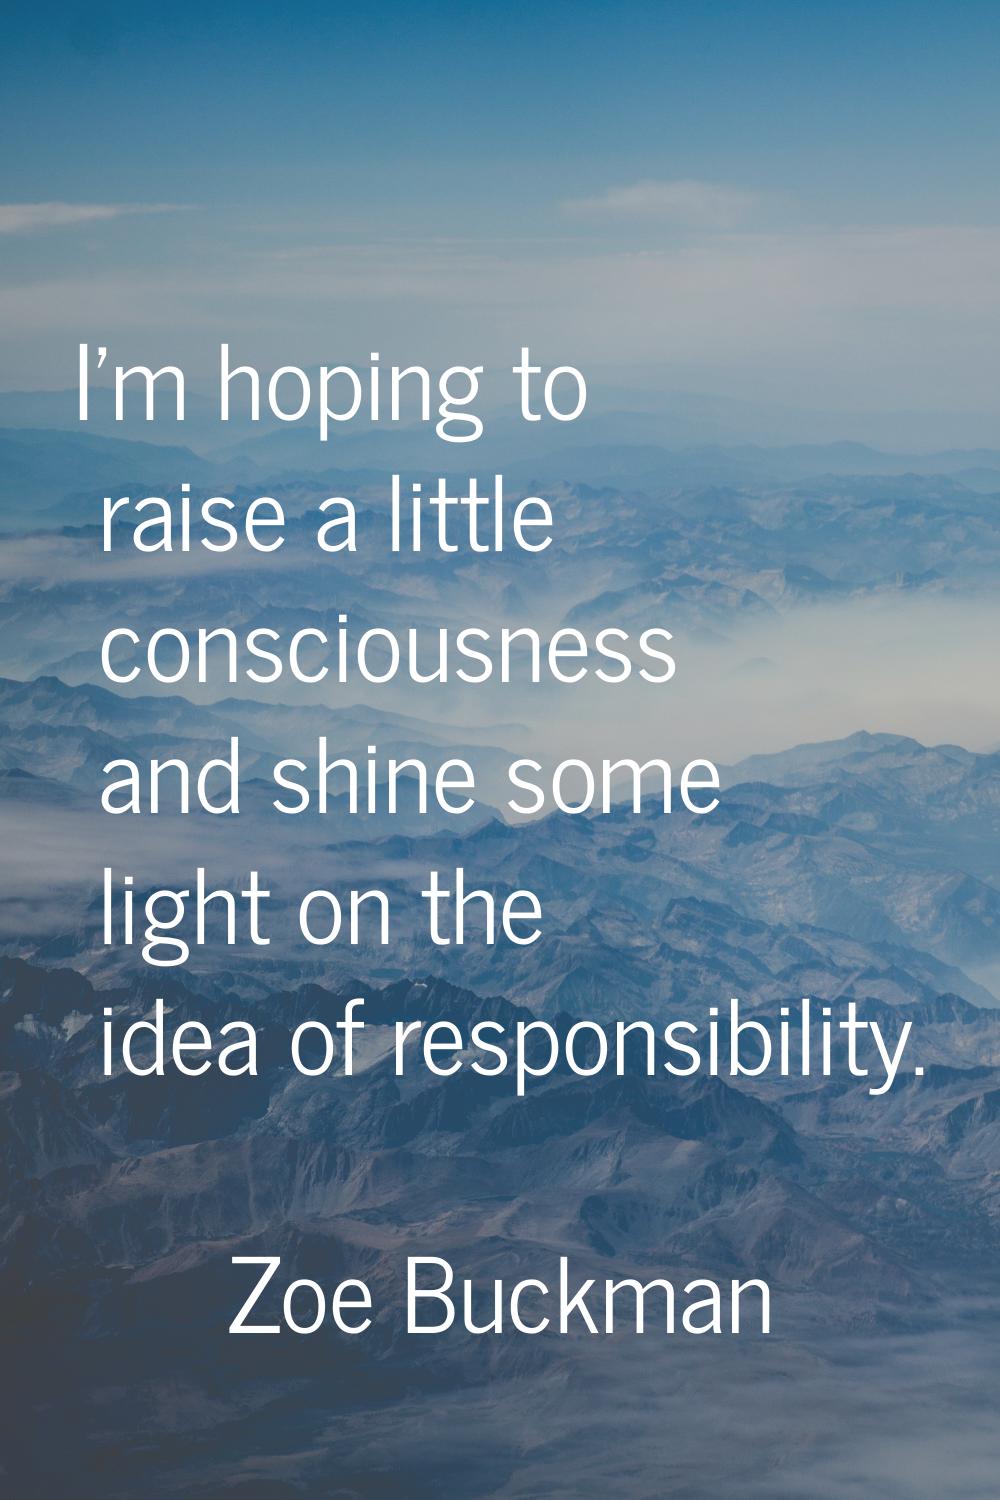 I'm hoping to raise a little consciousness and shine some light on the idea of responsibility.